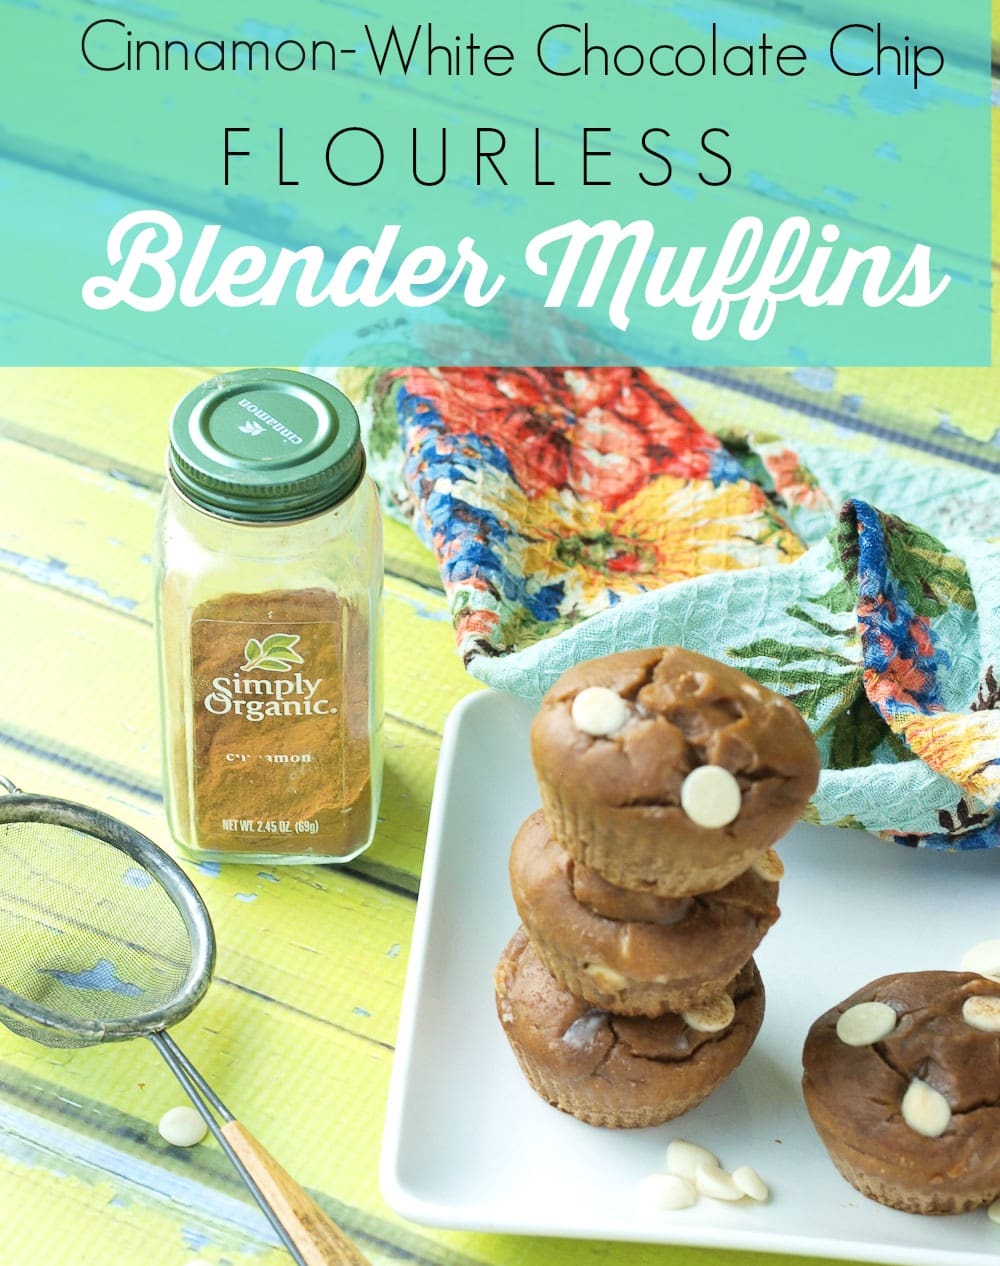 Flourless Cinnamon White Chocolate Chip Blender Muffin recipe.  You can prep these easy and healthy muffins in 5 minutes! Great portable breakfast option.